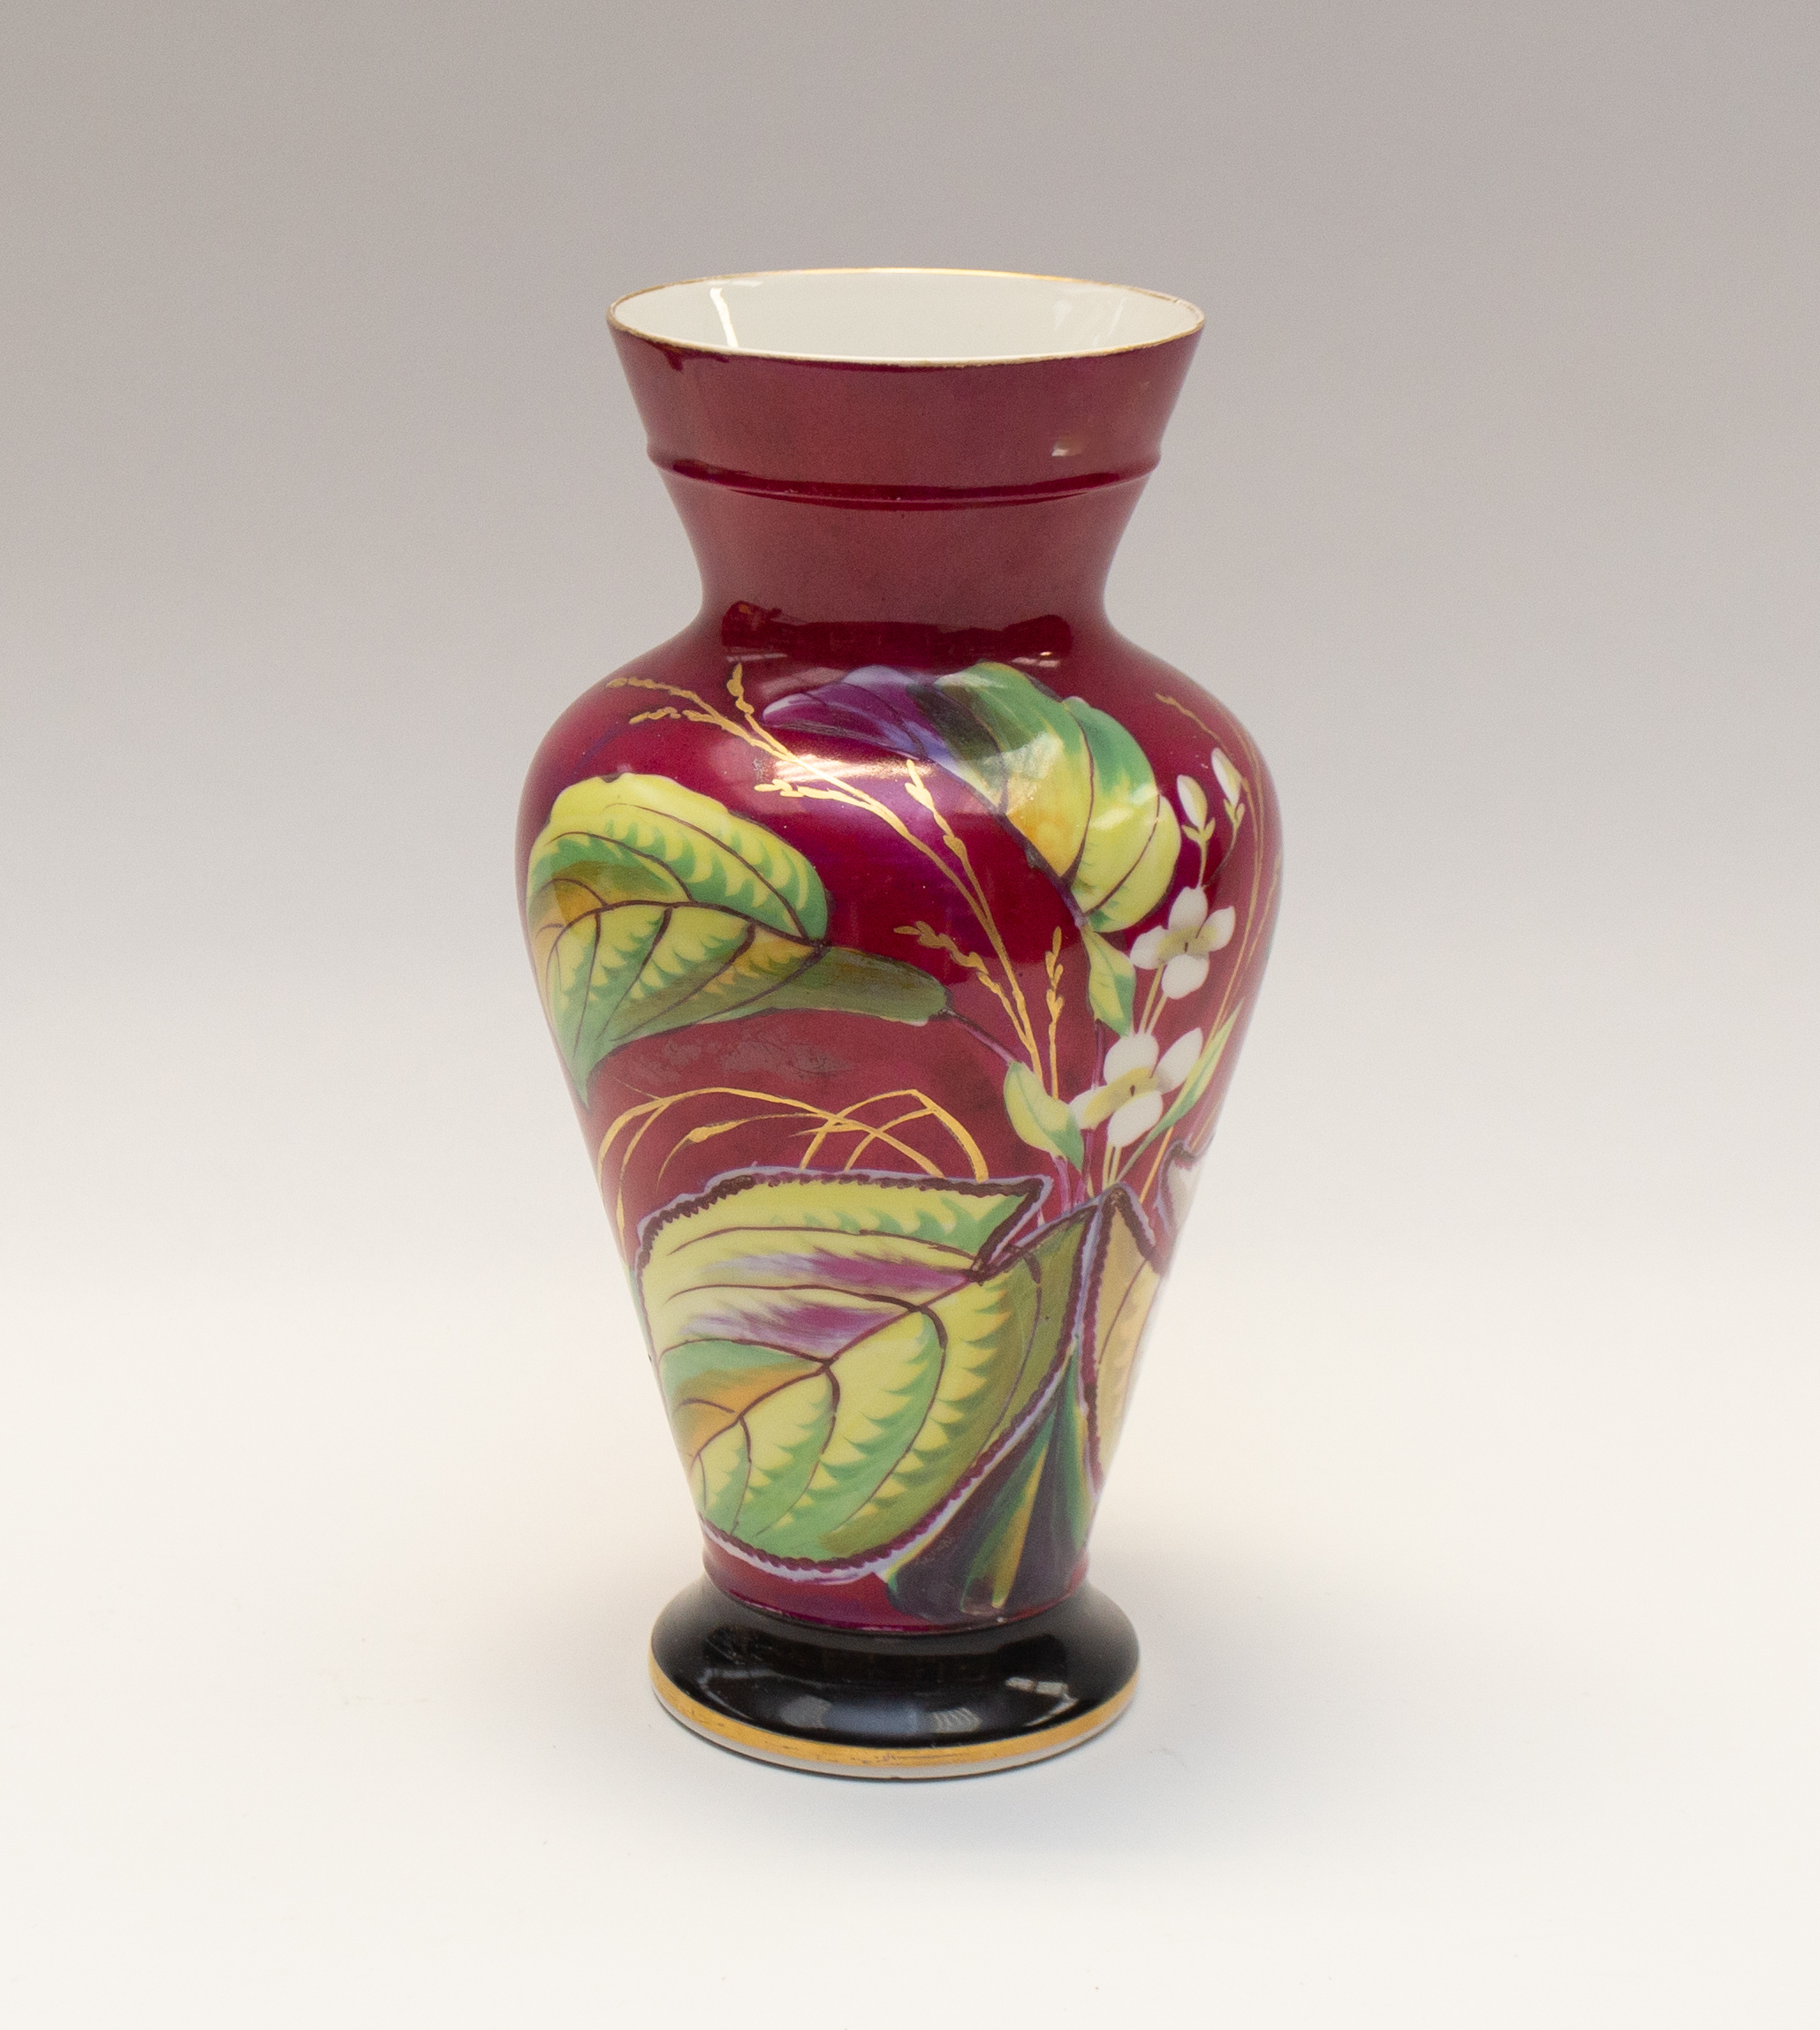 Late 19th century/ early 20th century single continental porcelain vase with foliage detail